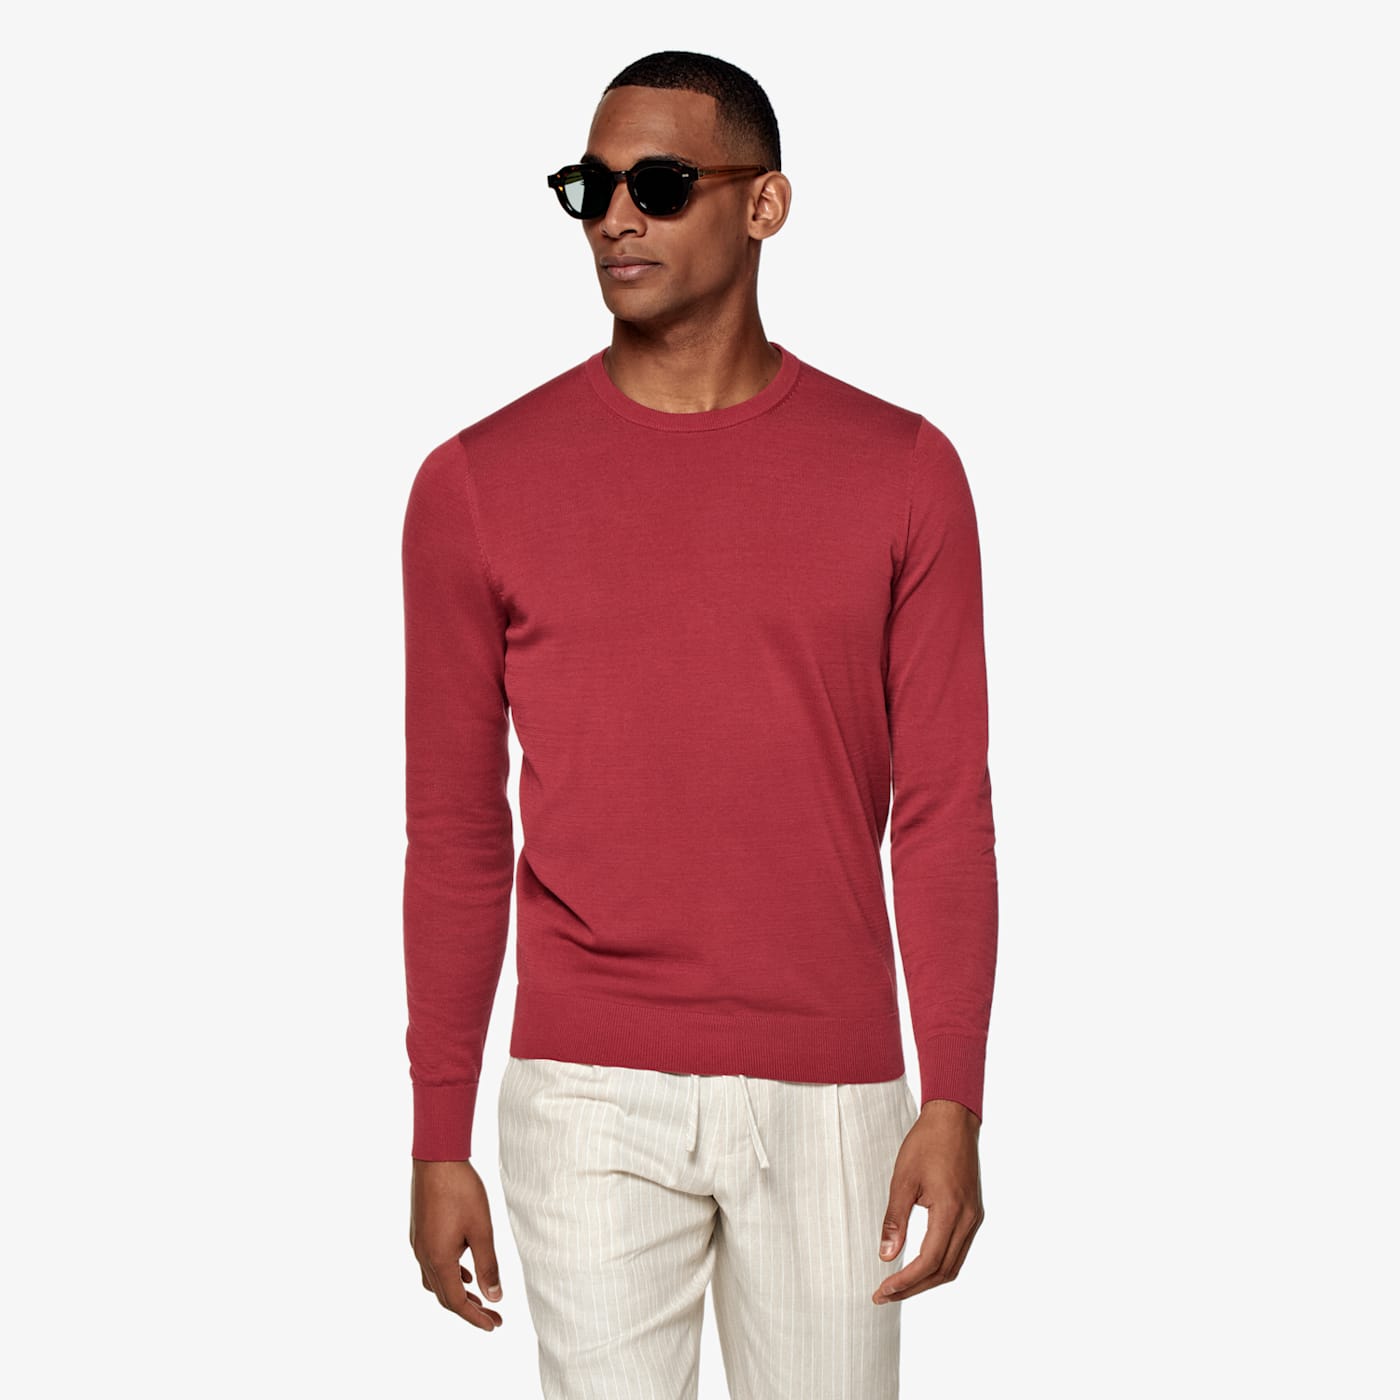 Suitsupply Red Crewneck